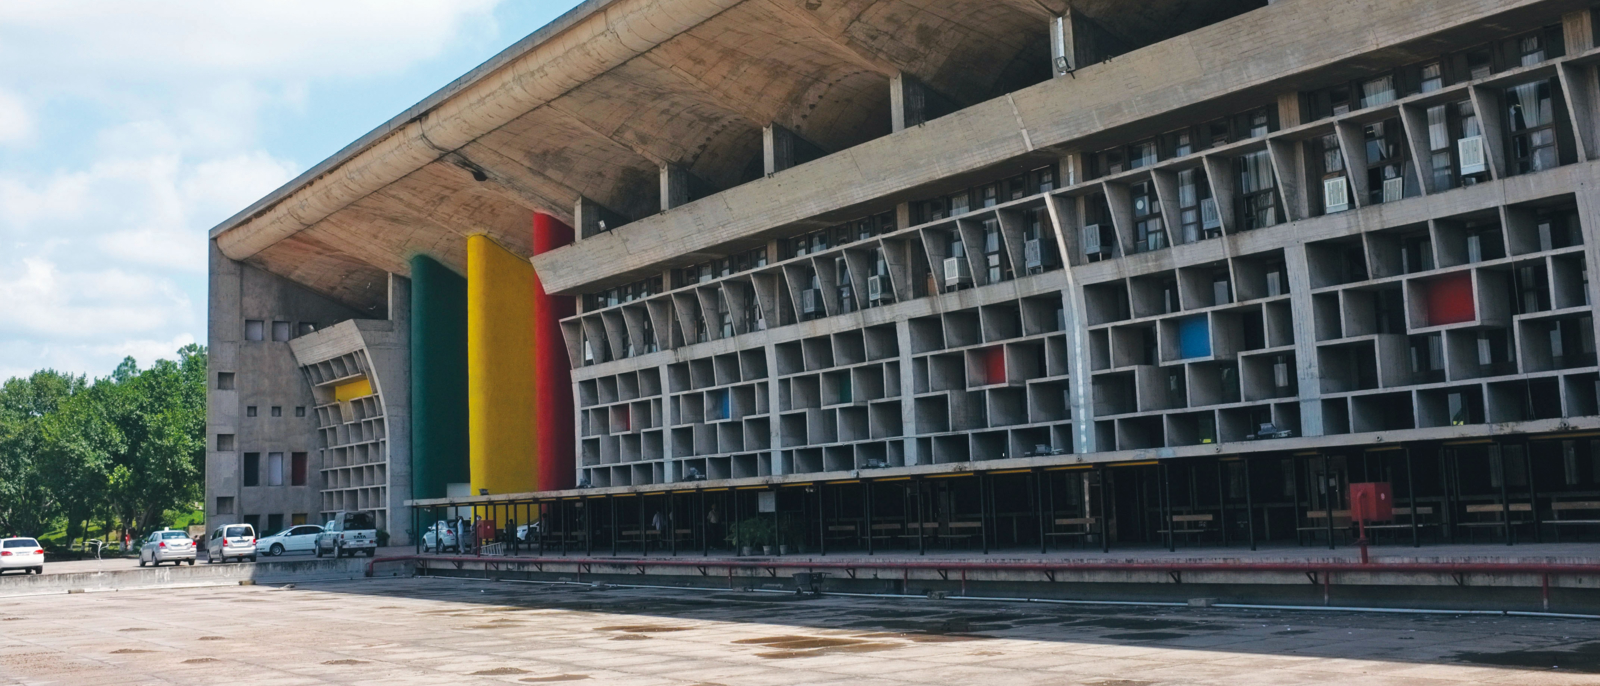 High Court at Chandigarh, by Le Corbusier.